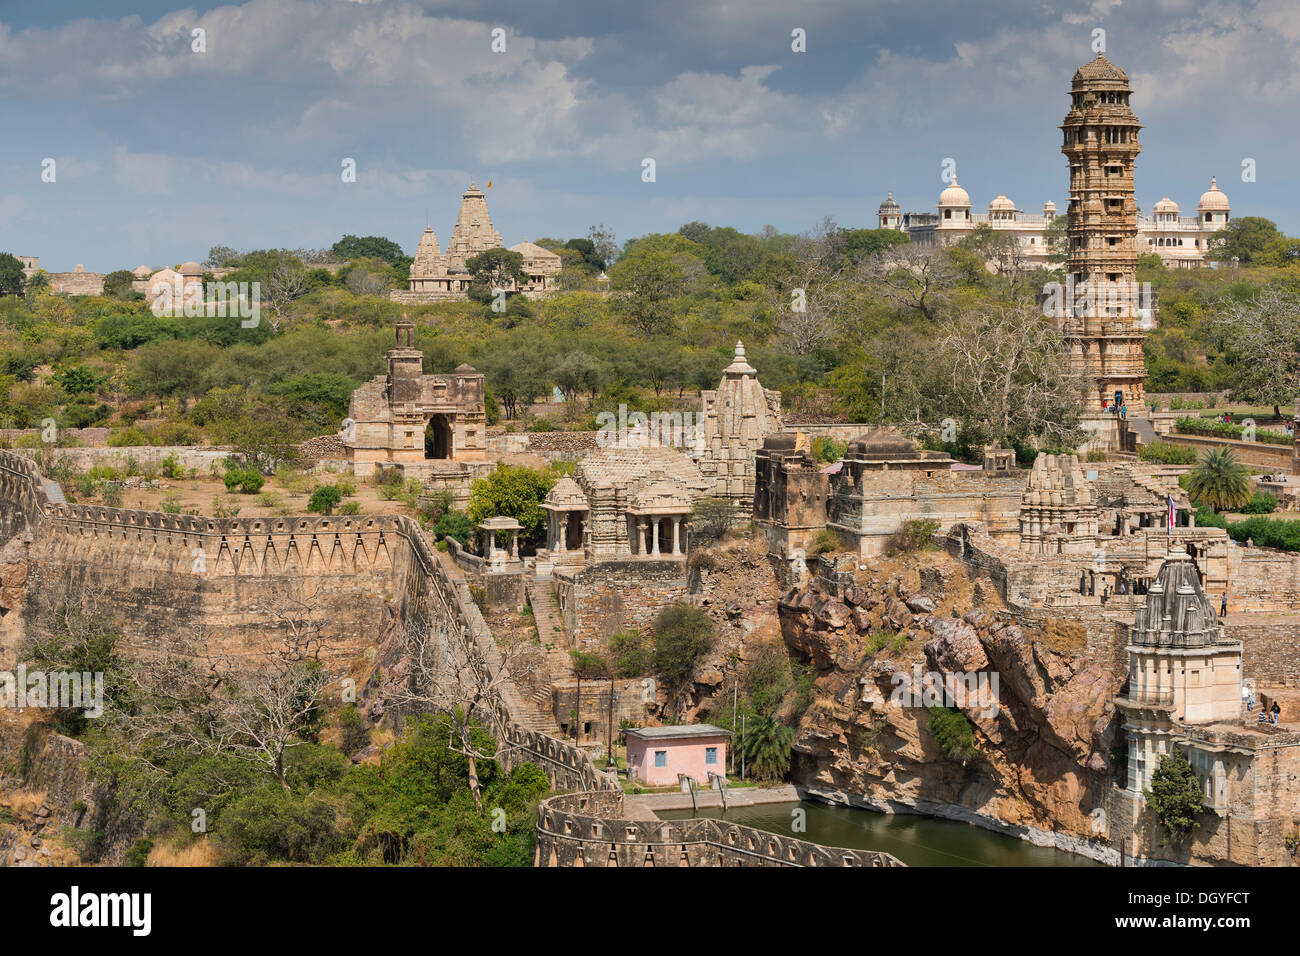 Fortified wall, Chittorgarh Fort of the Hindu Rajput princes with a temple complex and Vijaya Stambha, a victory tower built Stock Photo